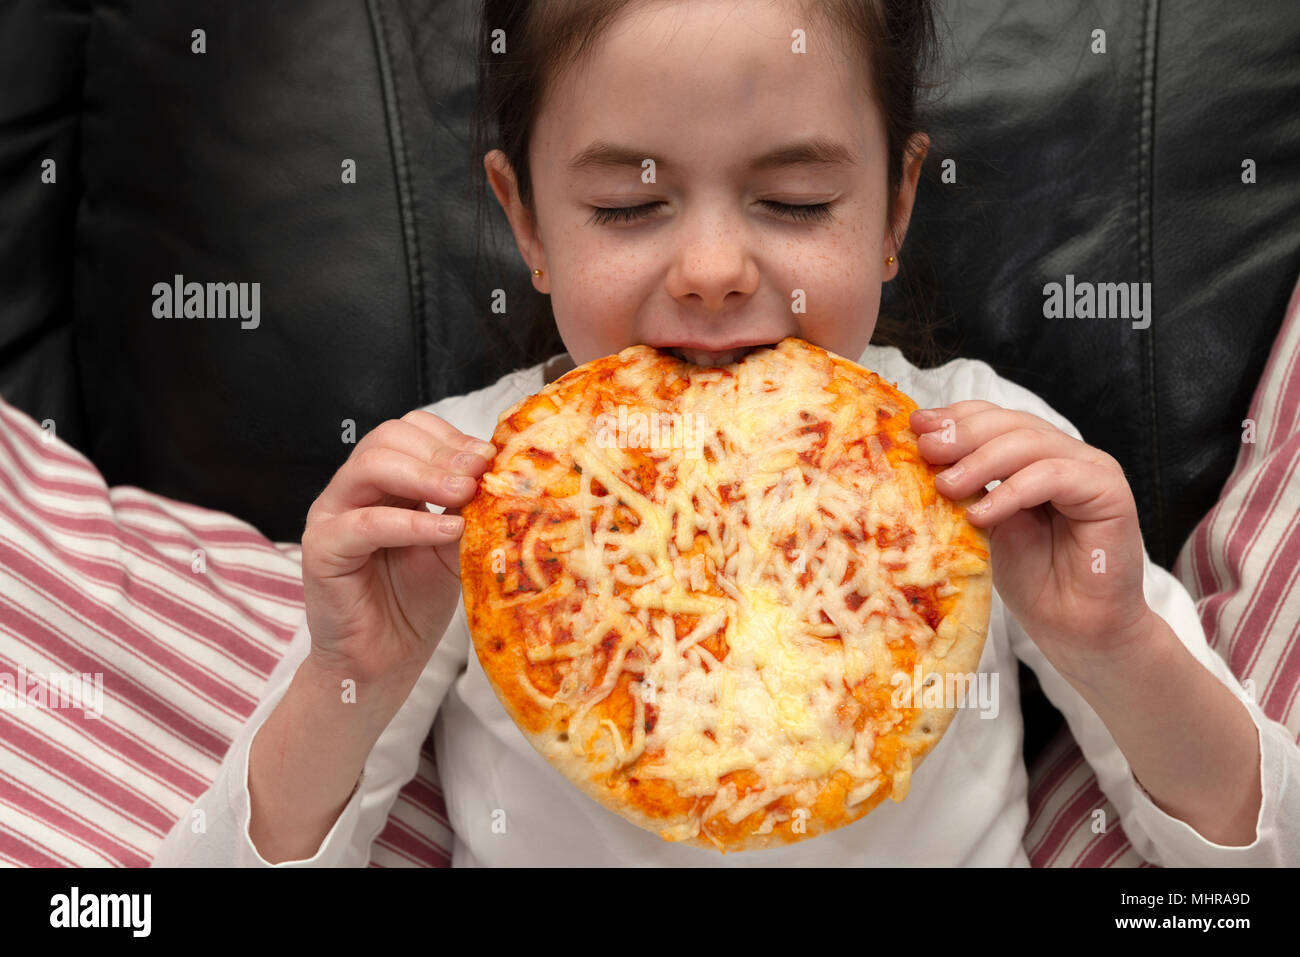 6-year old girl eating pizza Stock Photo